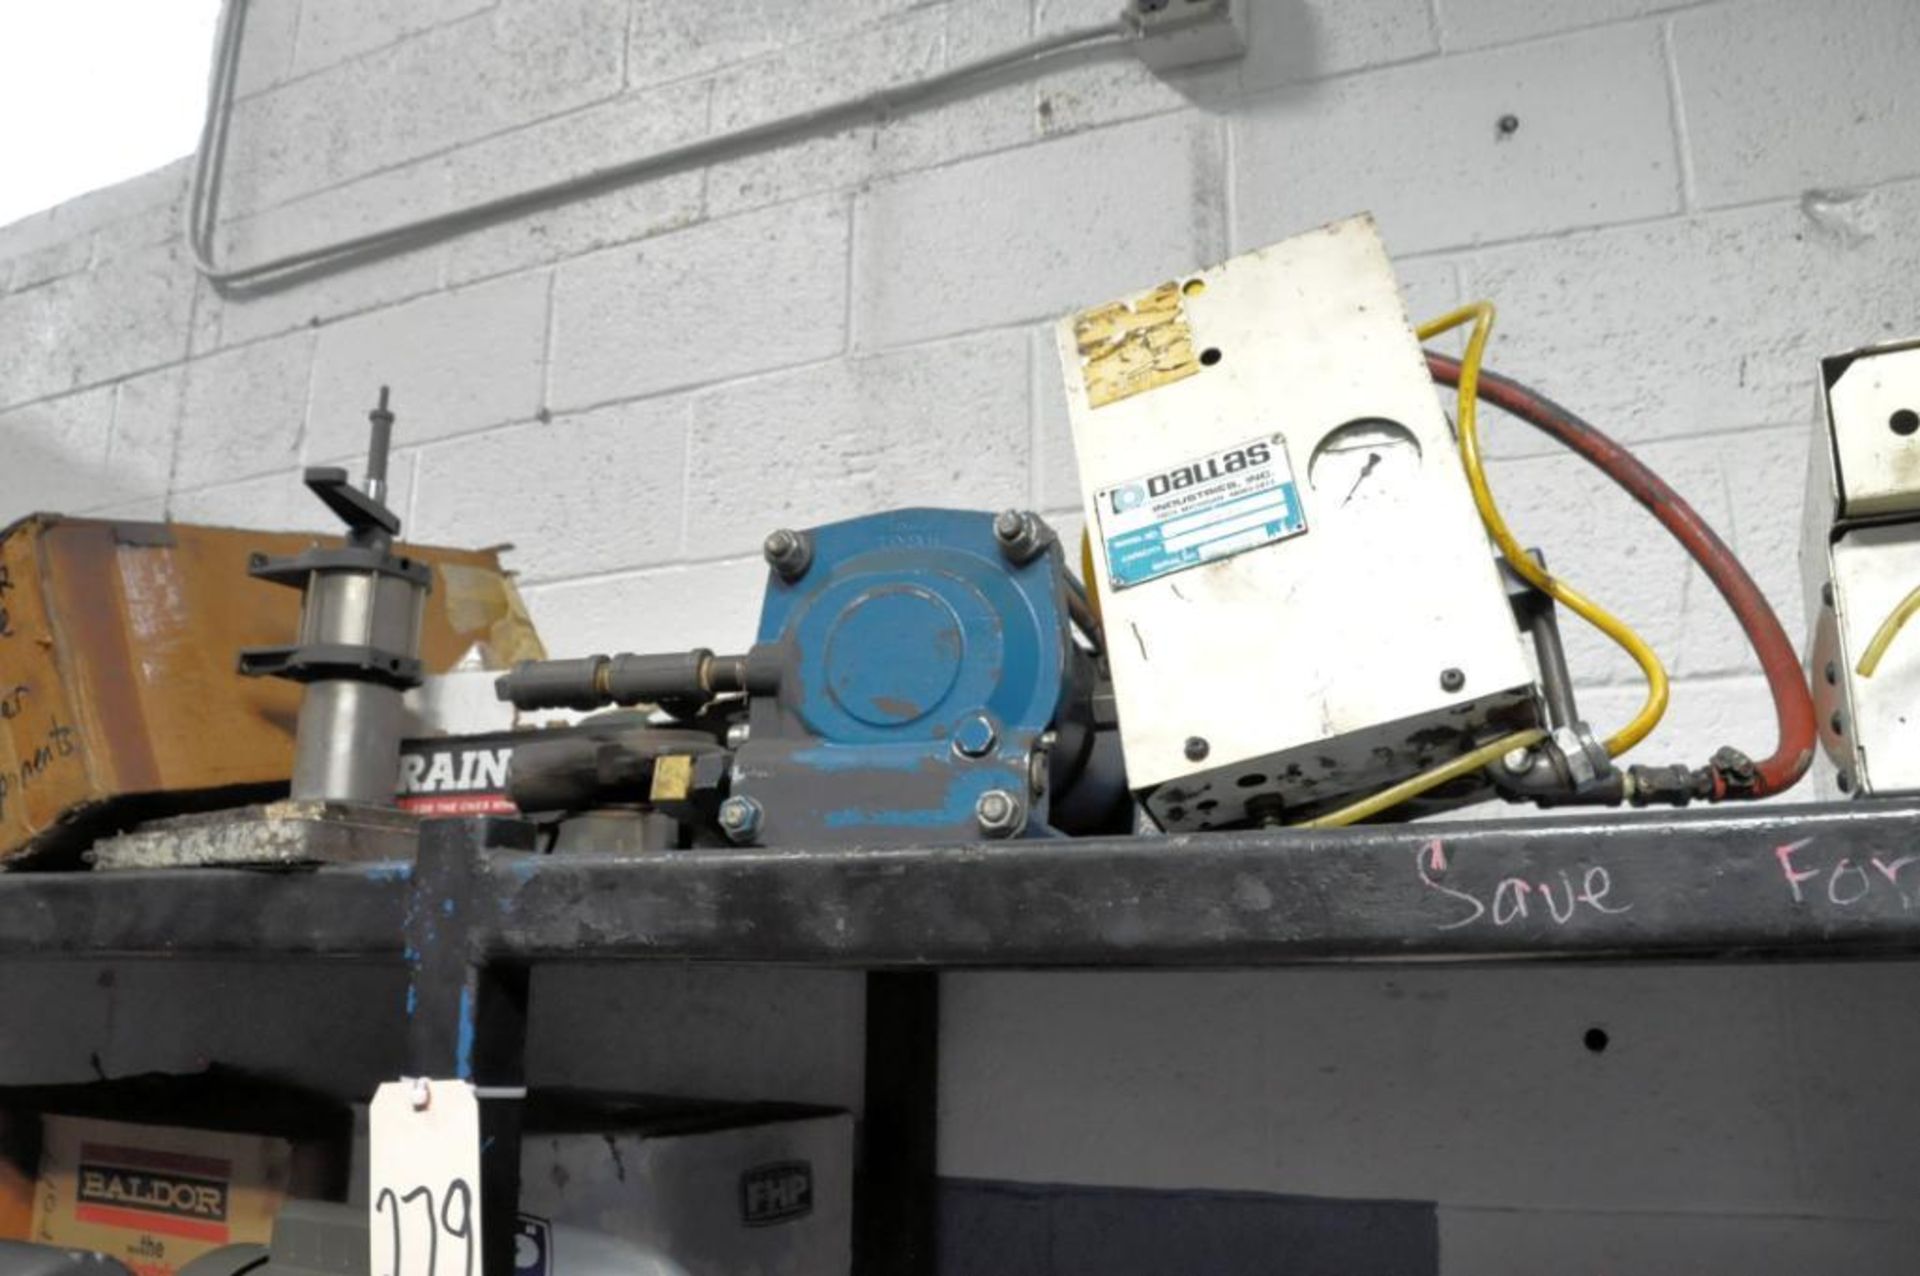 Lot-Drive Belt, Feeder Parts, Dallas Clamp Oilers etc. on (1) Shelf, (Shelving Not Included) - Image 3 of 3